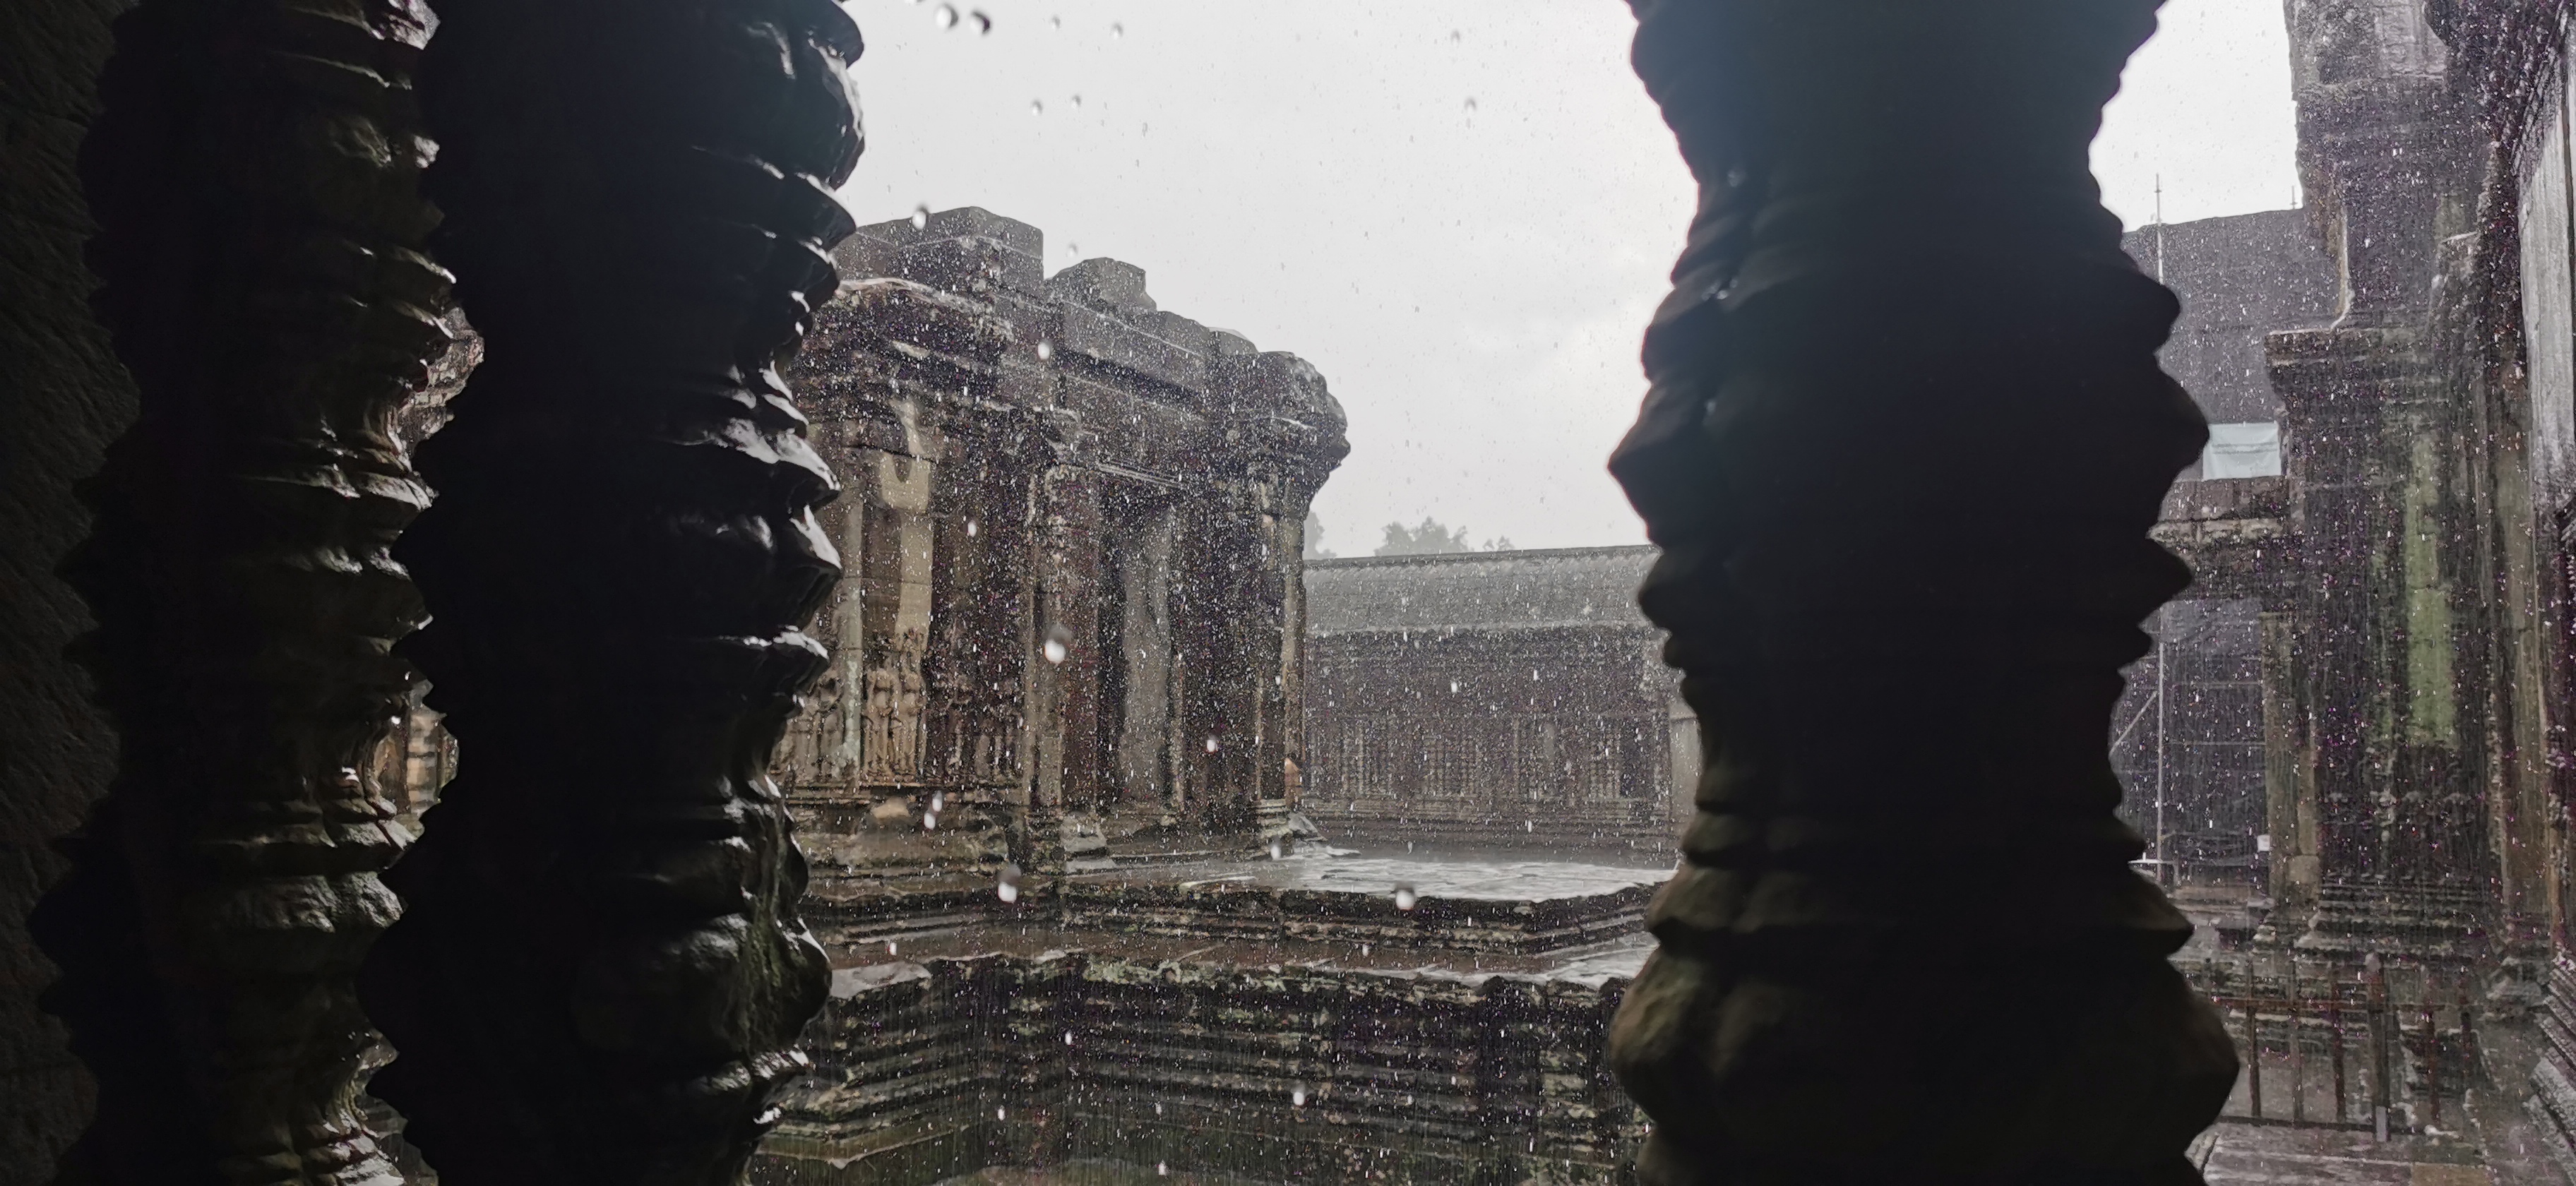 A view of the Angkor Archaeological Park on a rainy day in Cambodia. /CGTN